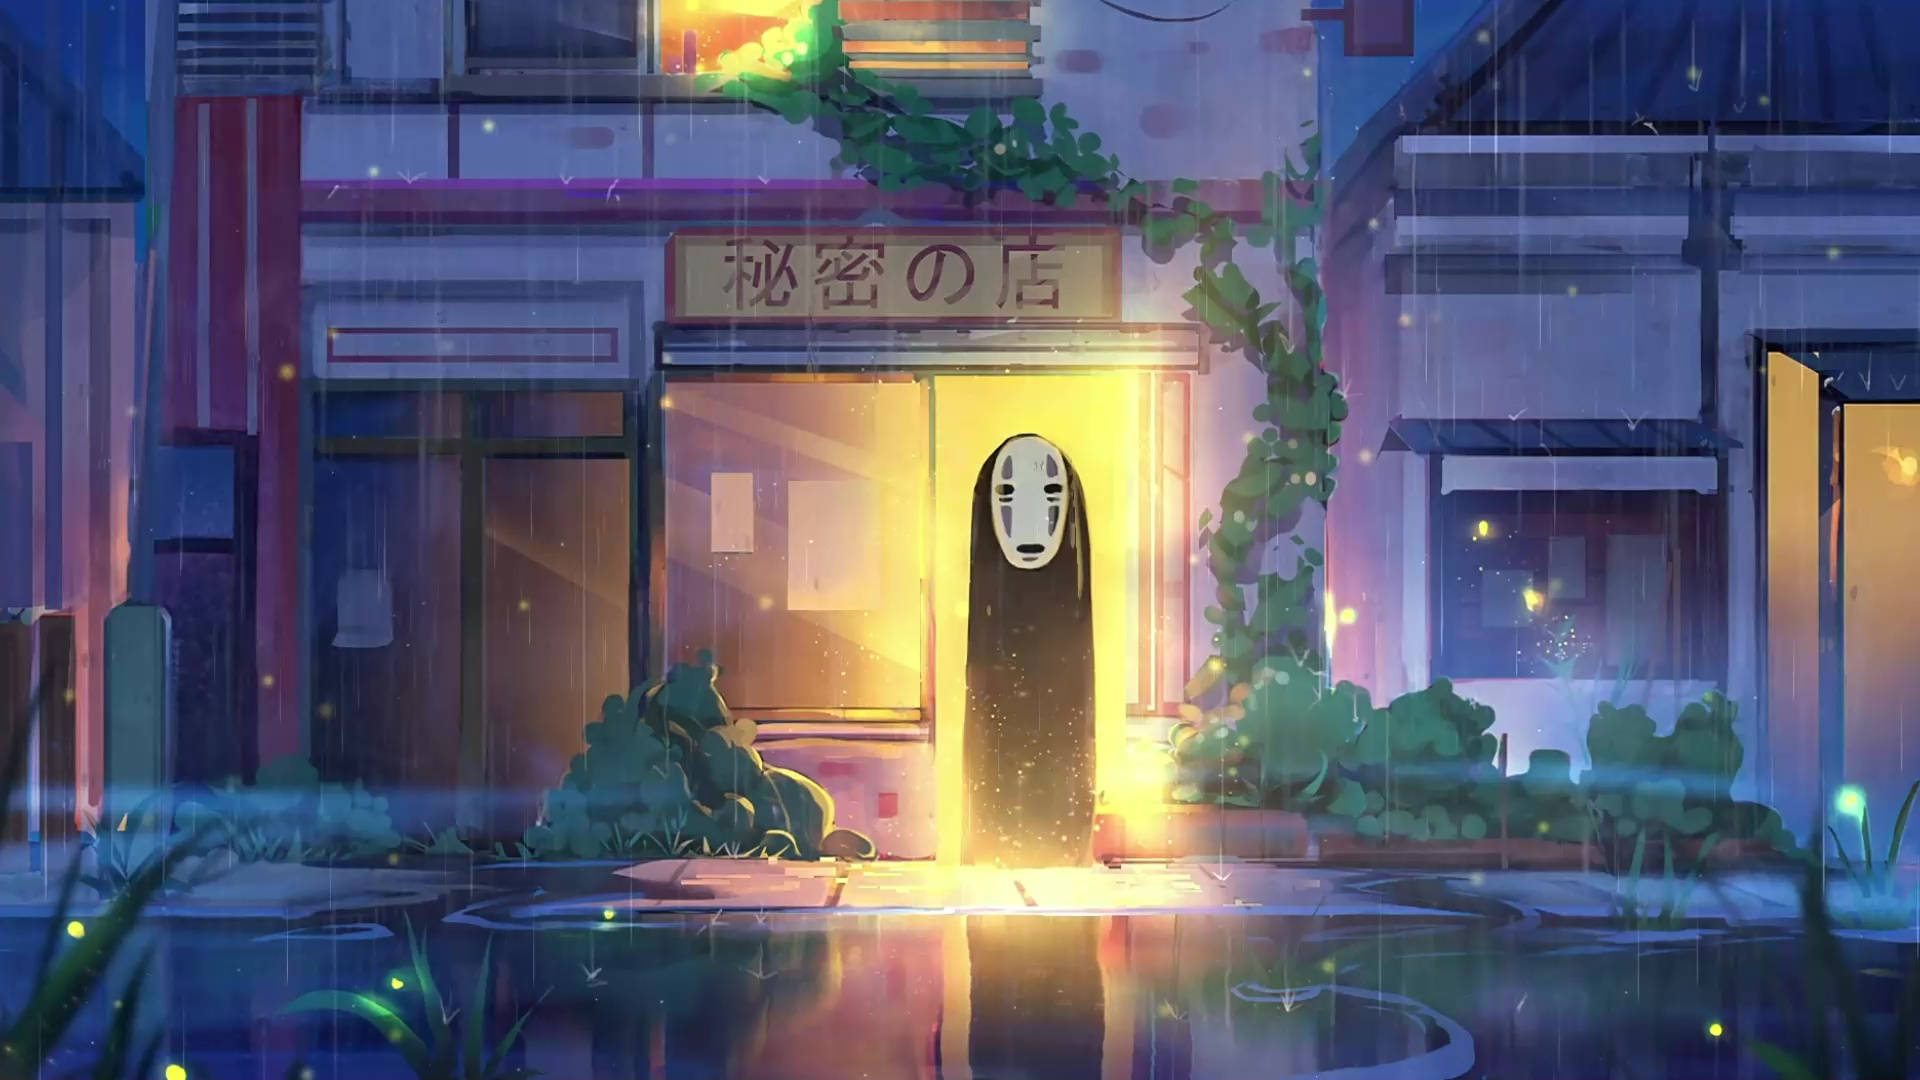 No-face At Store Background